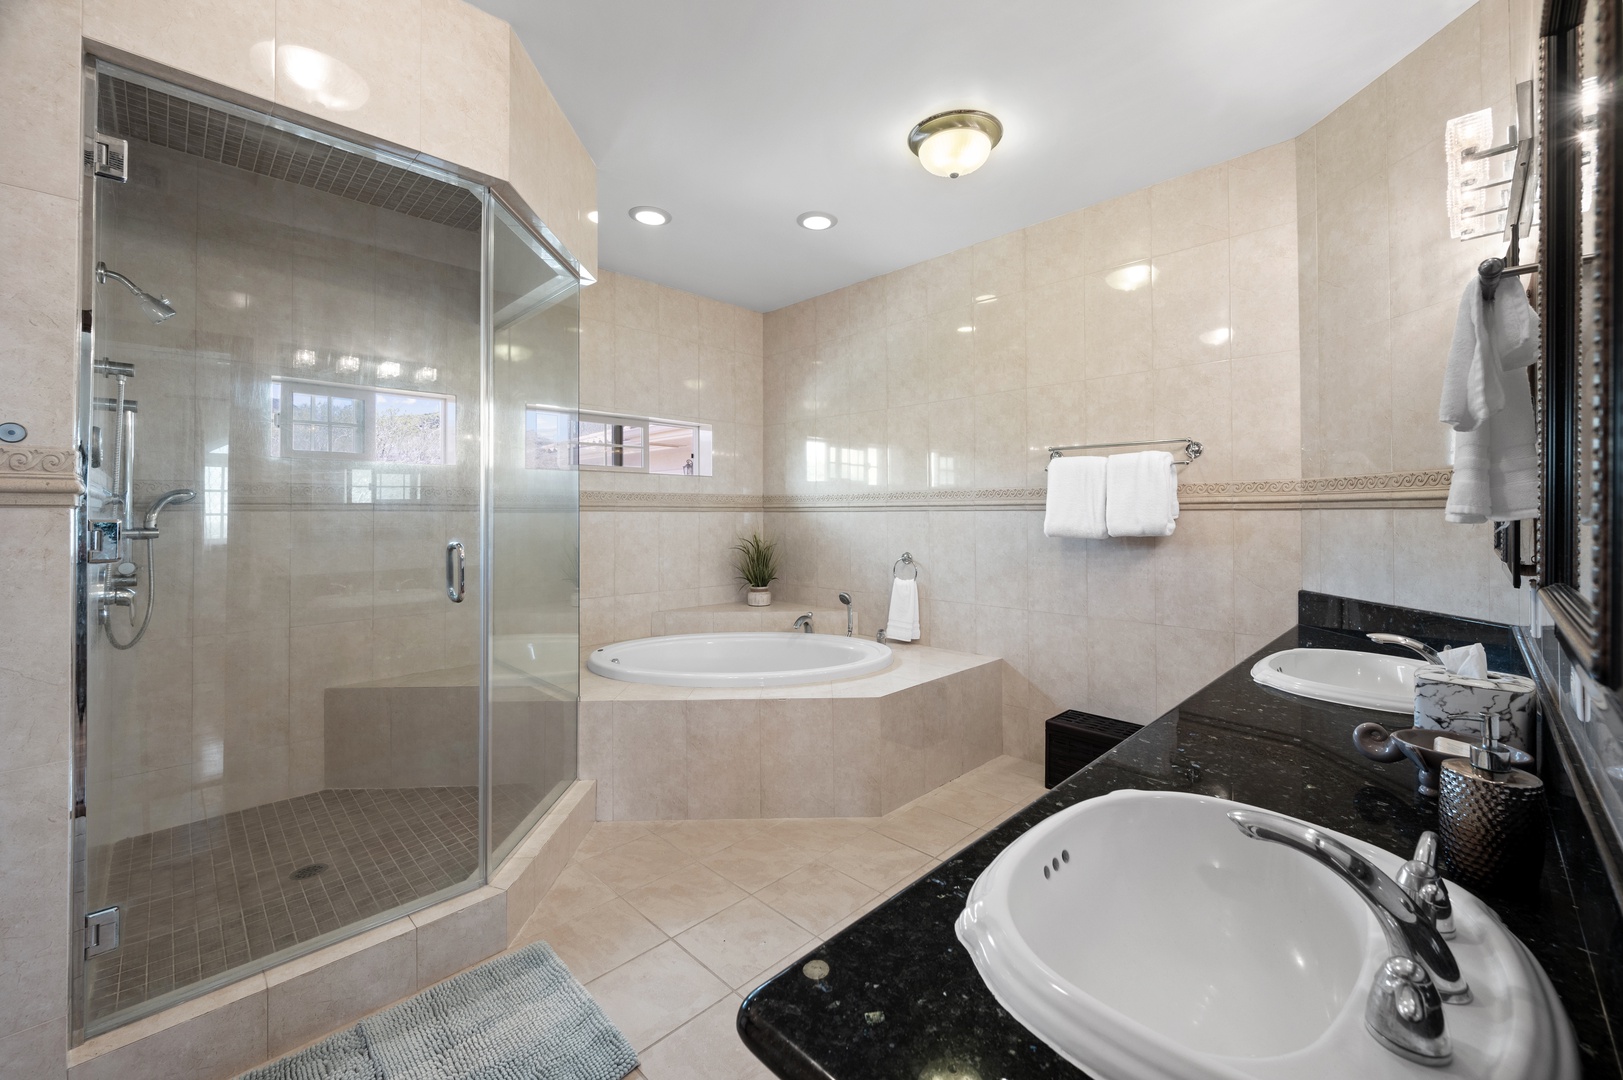 Honolulu Vacation Rentals, Lotus on a Hill* - The Primary Bedroom Ensuite is equipped with a dual vanity, walk-in shower, and spa-like soaking tub